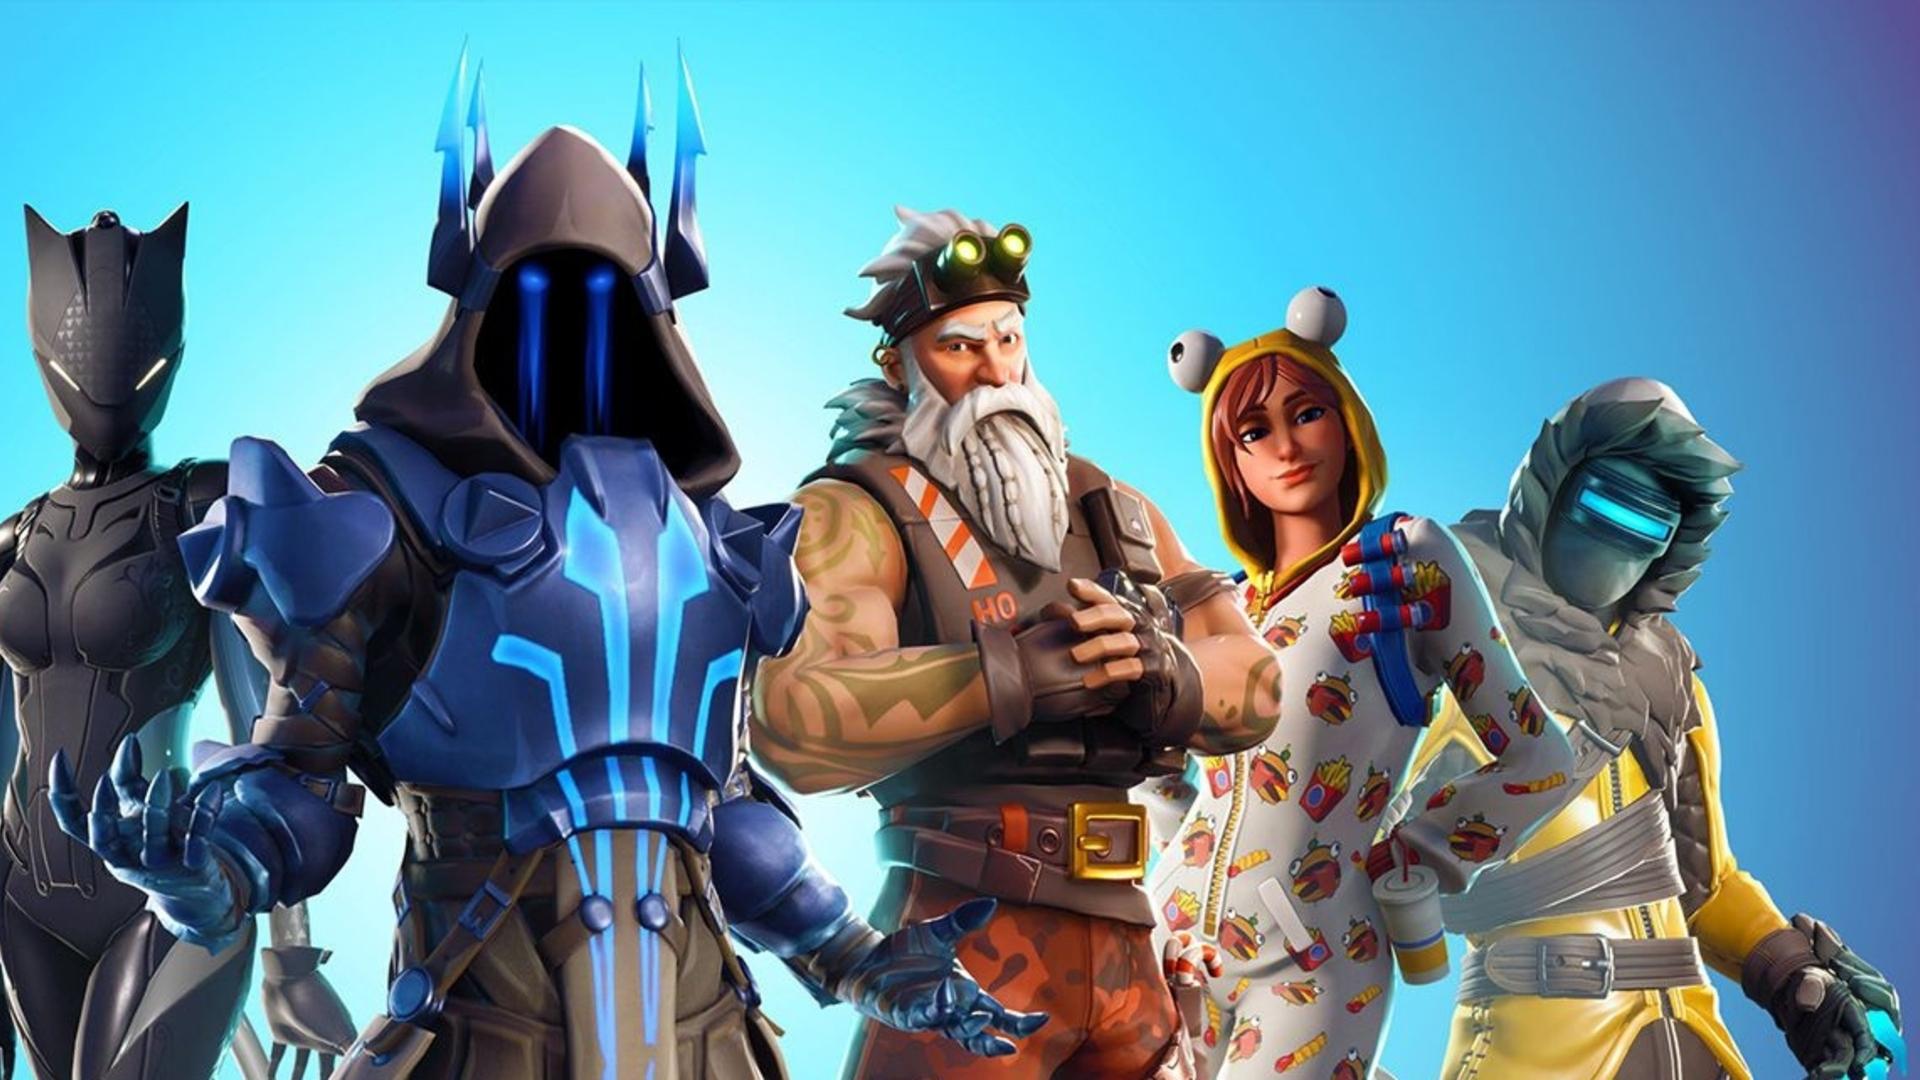 Fortnite season 7 trailer and battle pass details are here